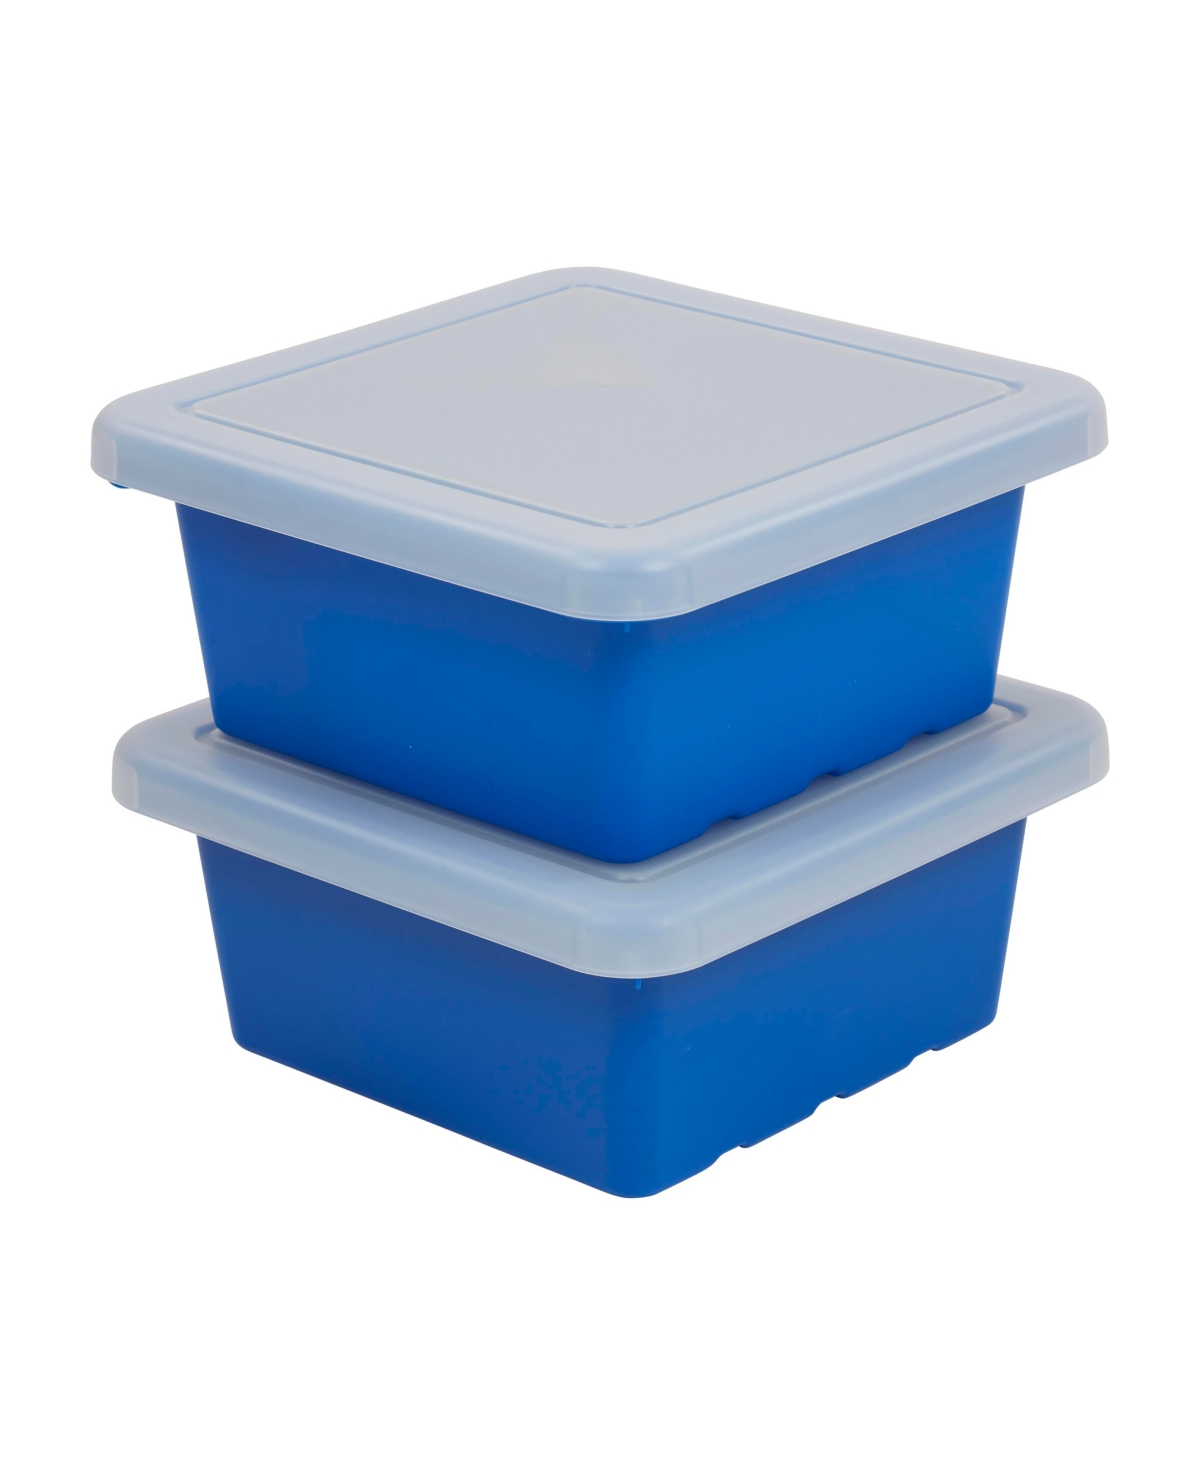 Square Bin with Lid, Storage Containers, Blue, 2-Pack - Red